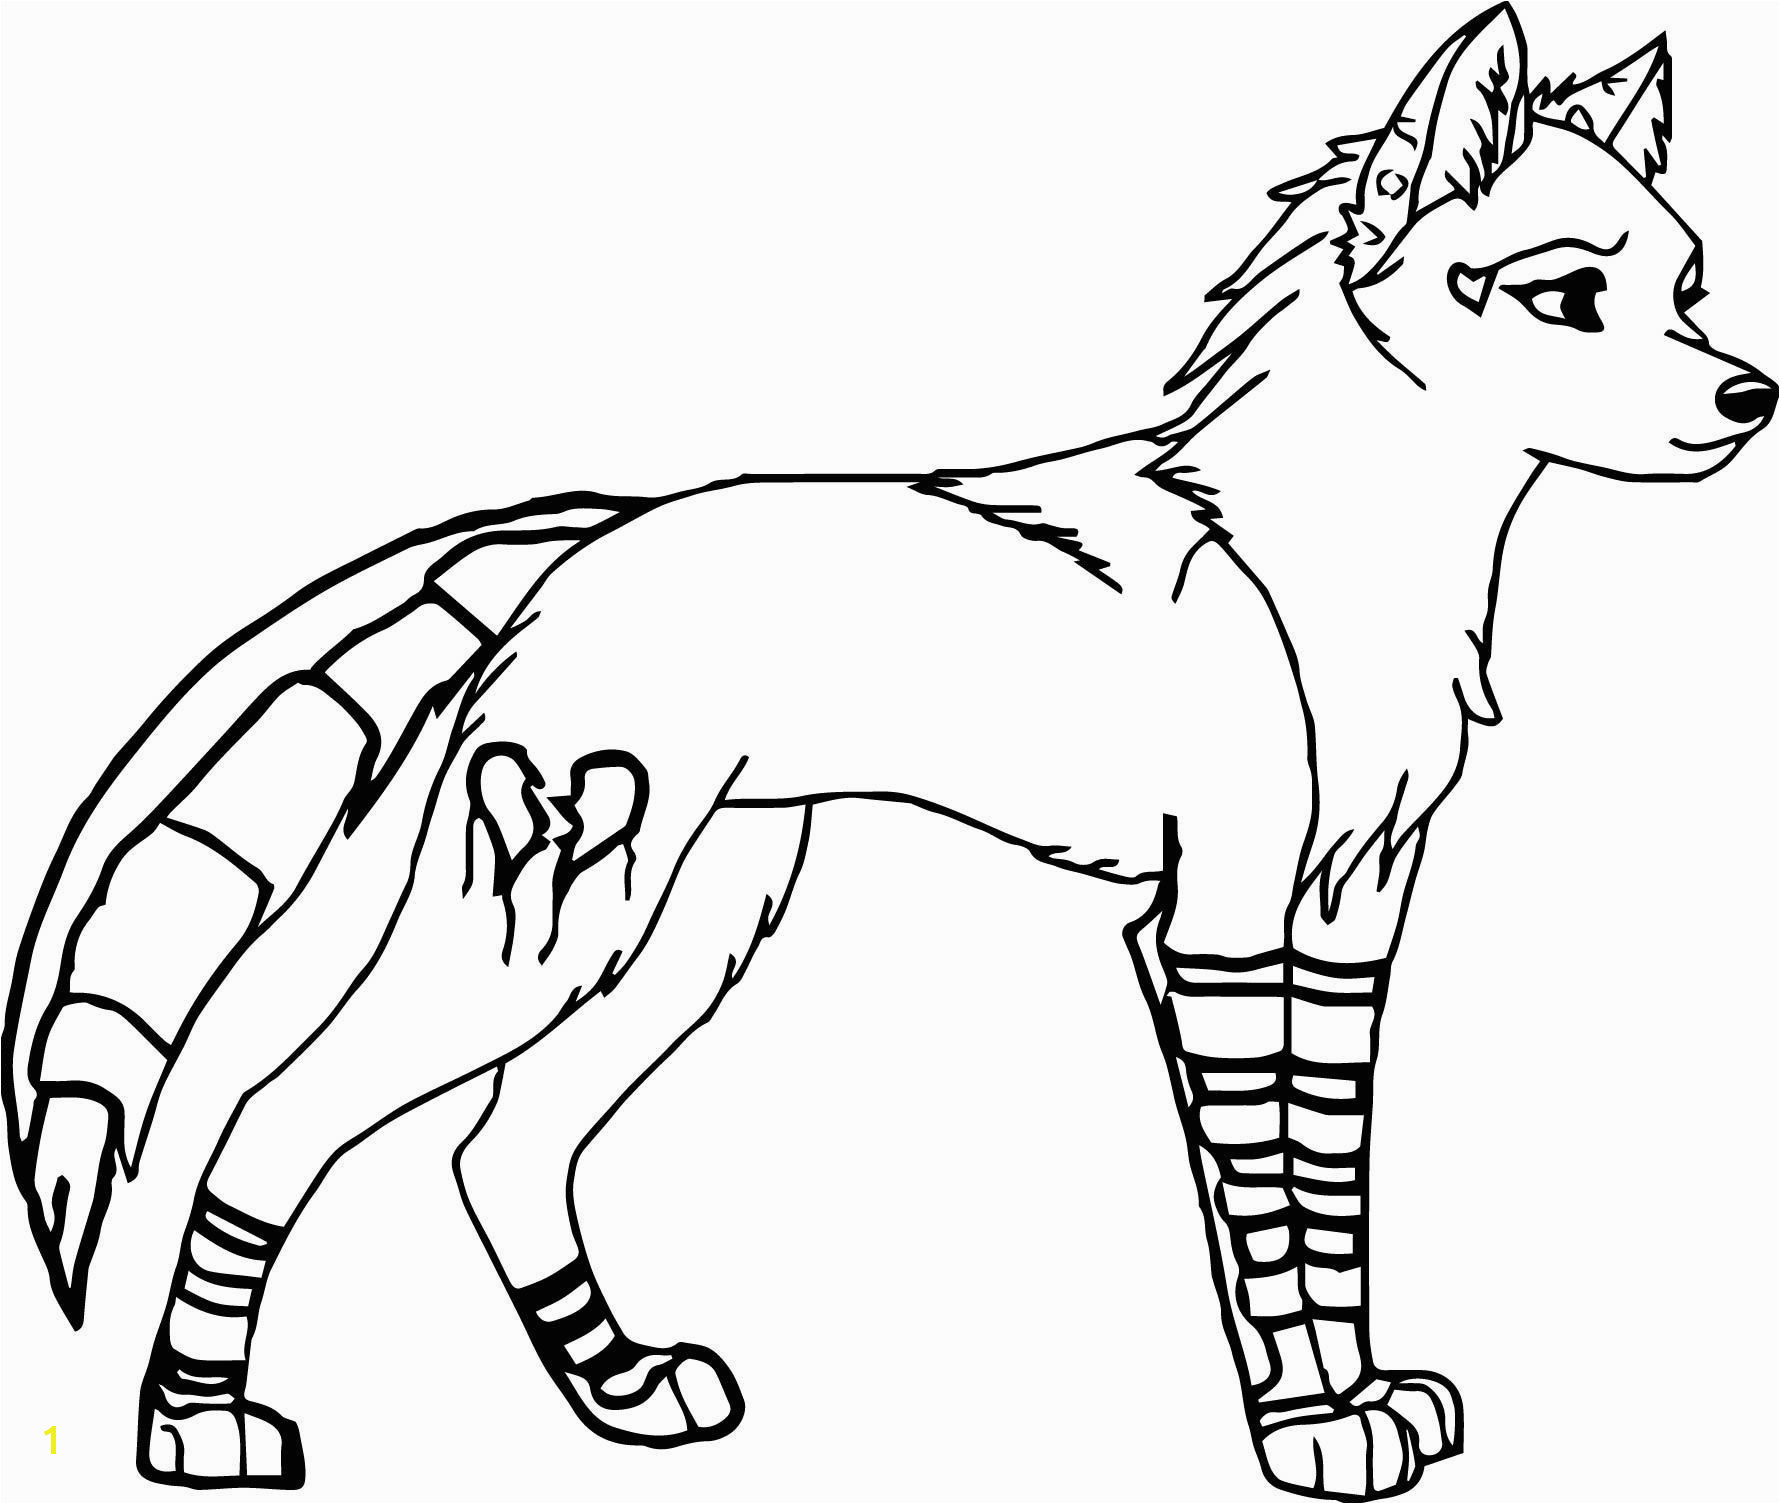 Wolf Coloring Pages for Adults Coloring Pages Wolf Elegant Wolf Coloring Pages Lovely Home